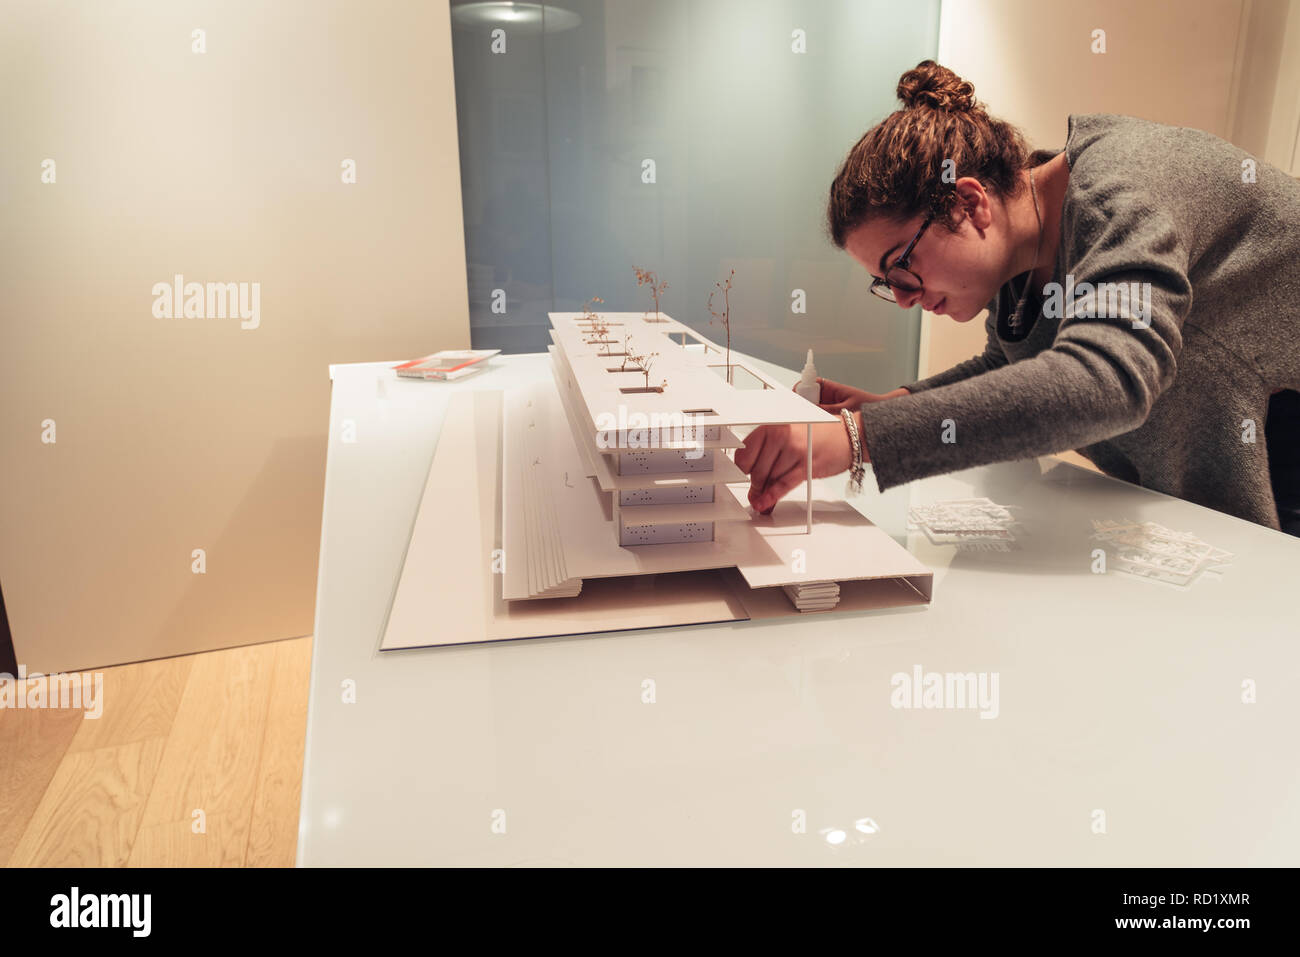 Female architect working on architecture model made with cardboard on table in office of architectural firm Stock Photo